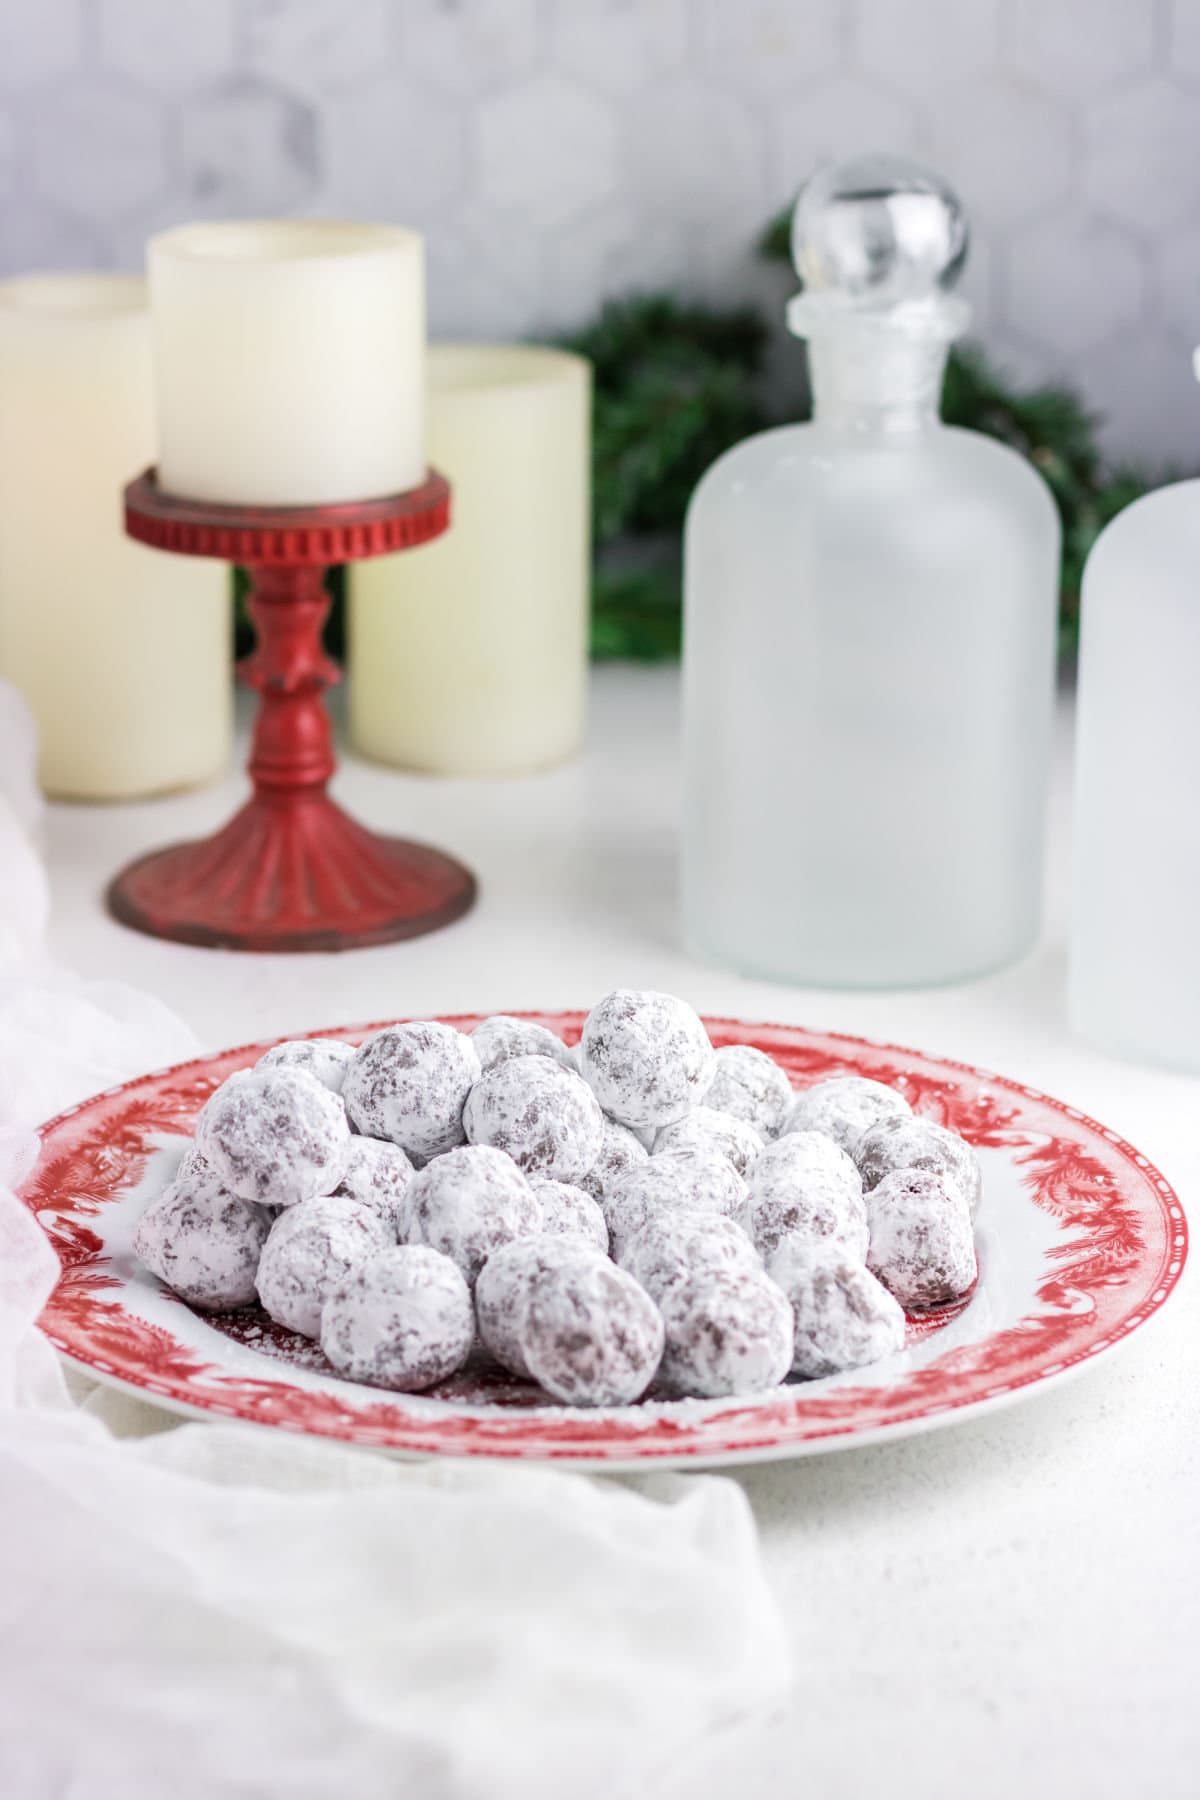 Bourbon balls rolled in powdered sugar on a table.